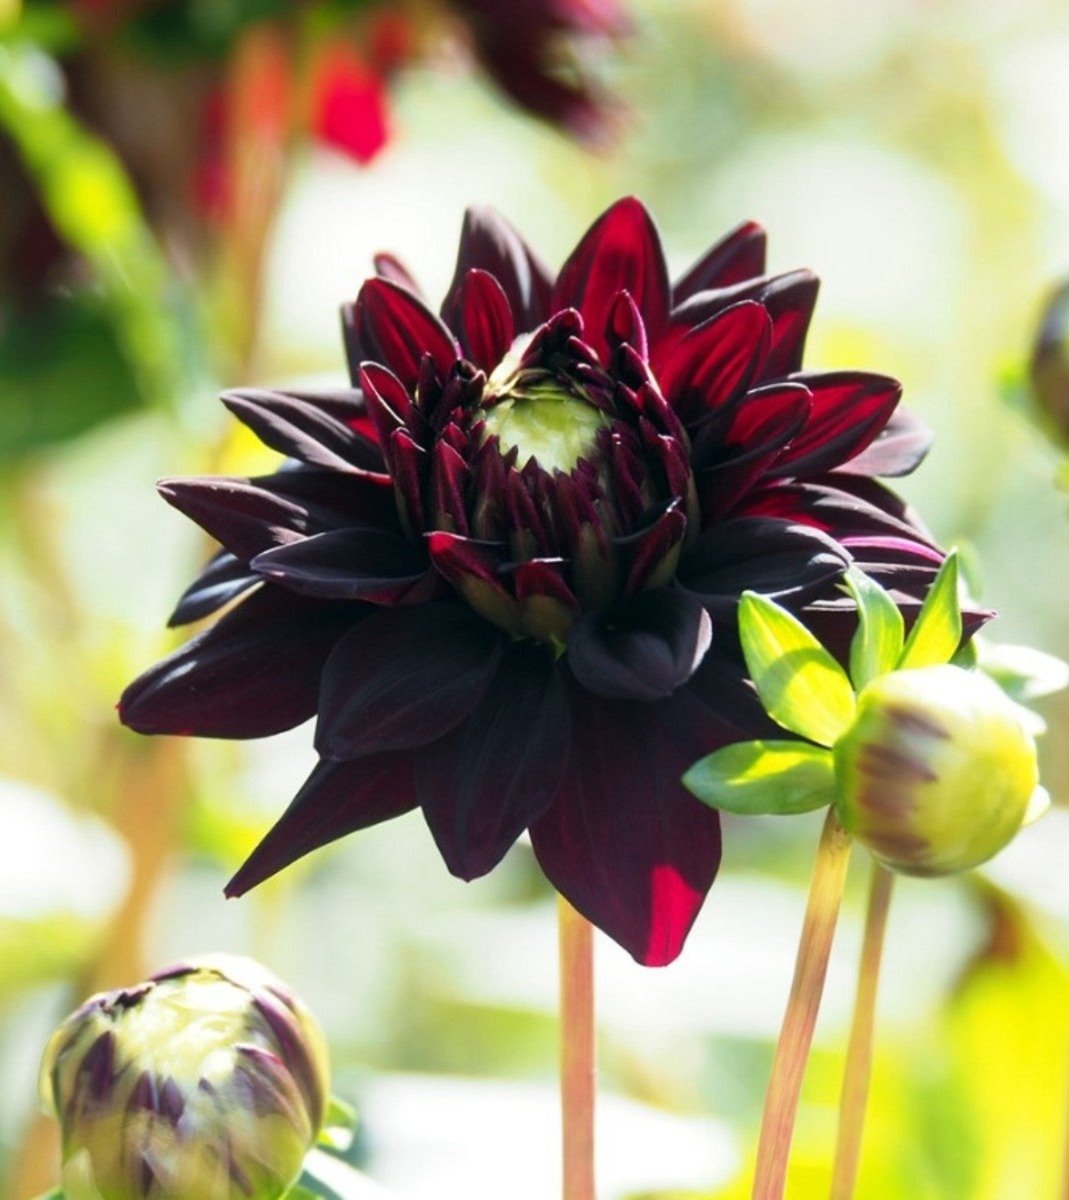 Black Cameo Dahlia: Dark red flower with green leaves